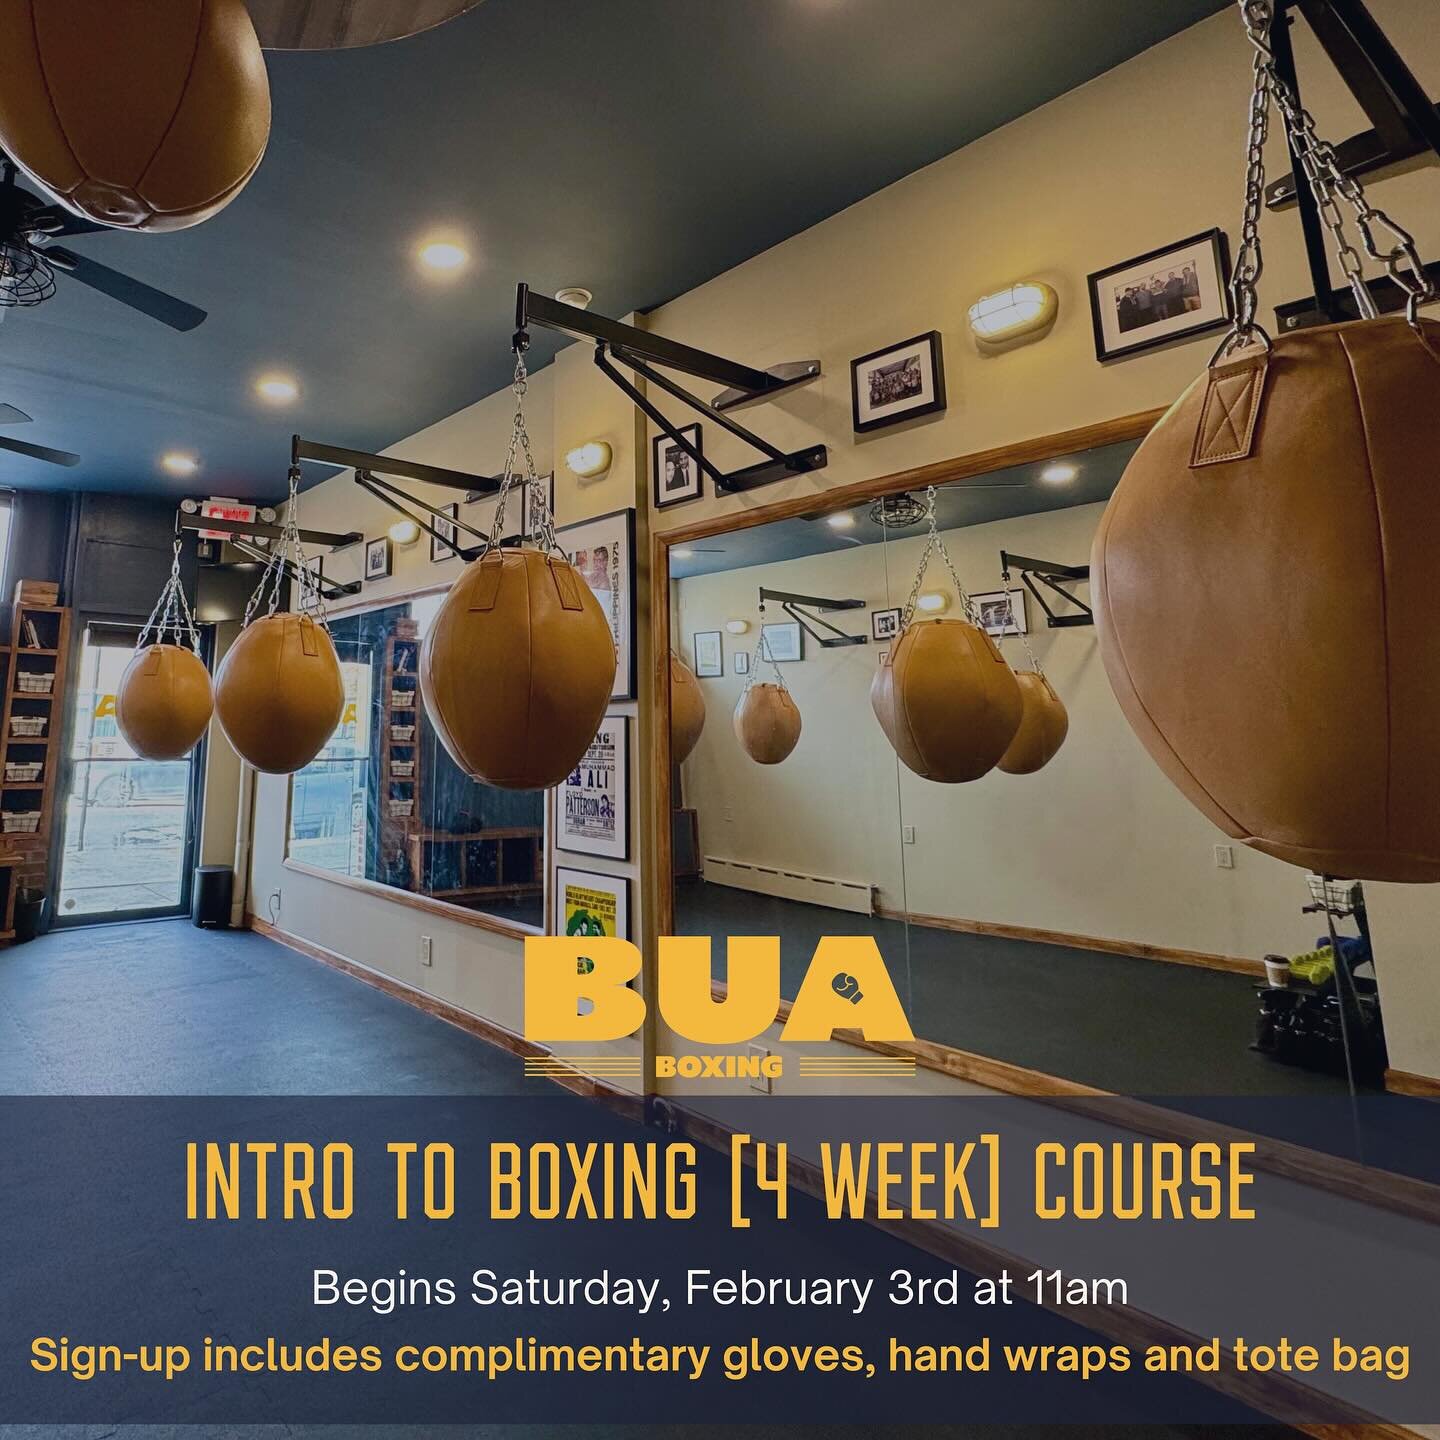 There&rsquo;s still time to join our Intro to Boxing course which begins this Saturday! 🥊

This course is ideal for beginners, as it will set you up to learn the basics, and more! Things like proper stance, footwork, basic punches, defensive techniq